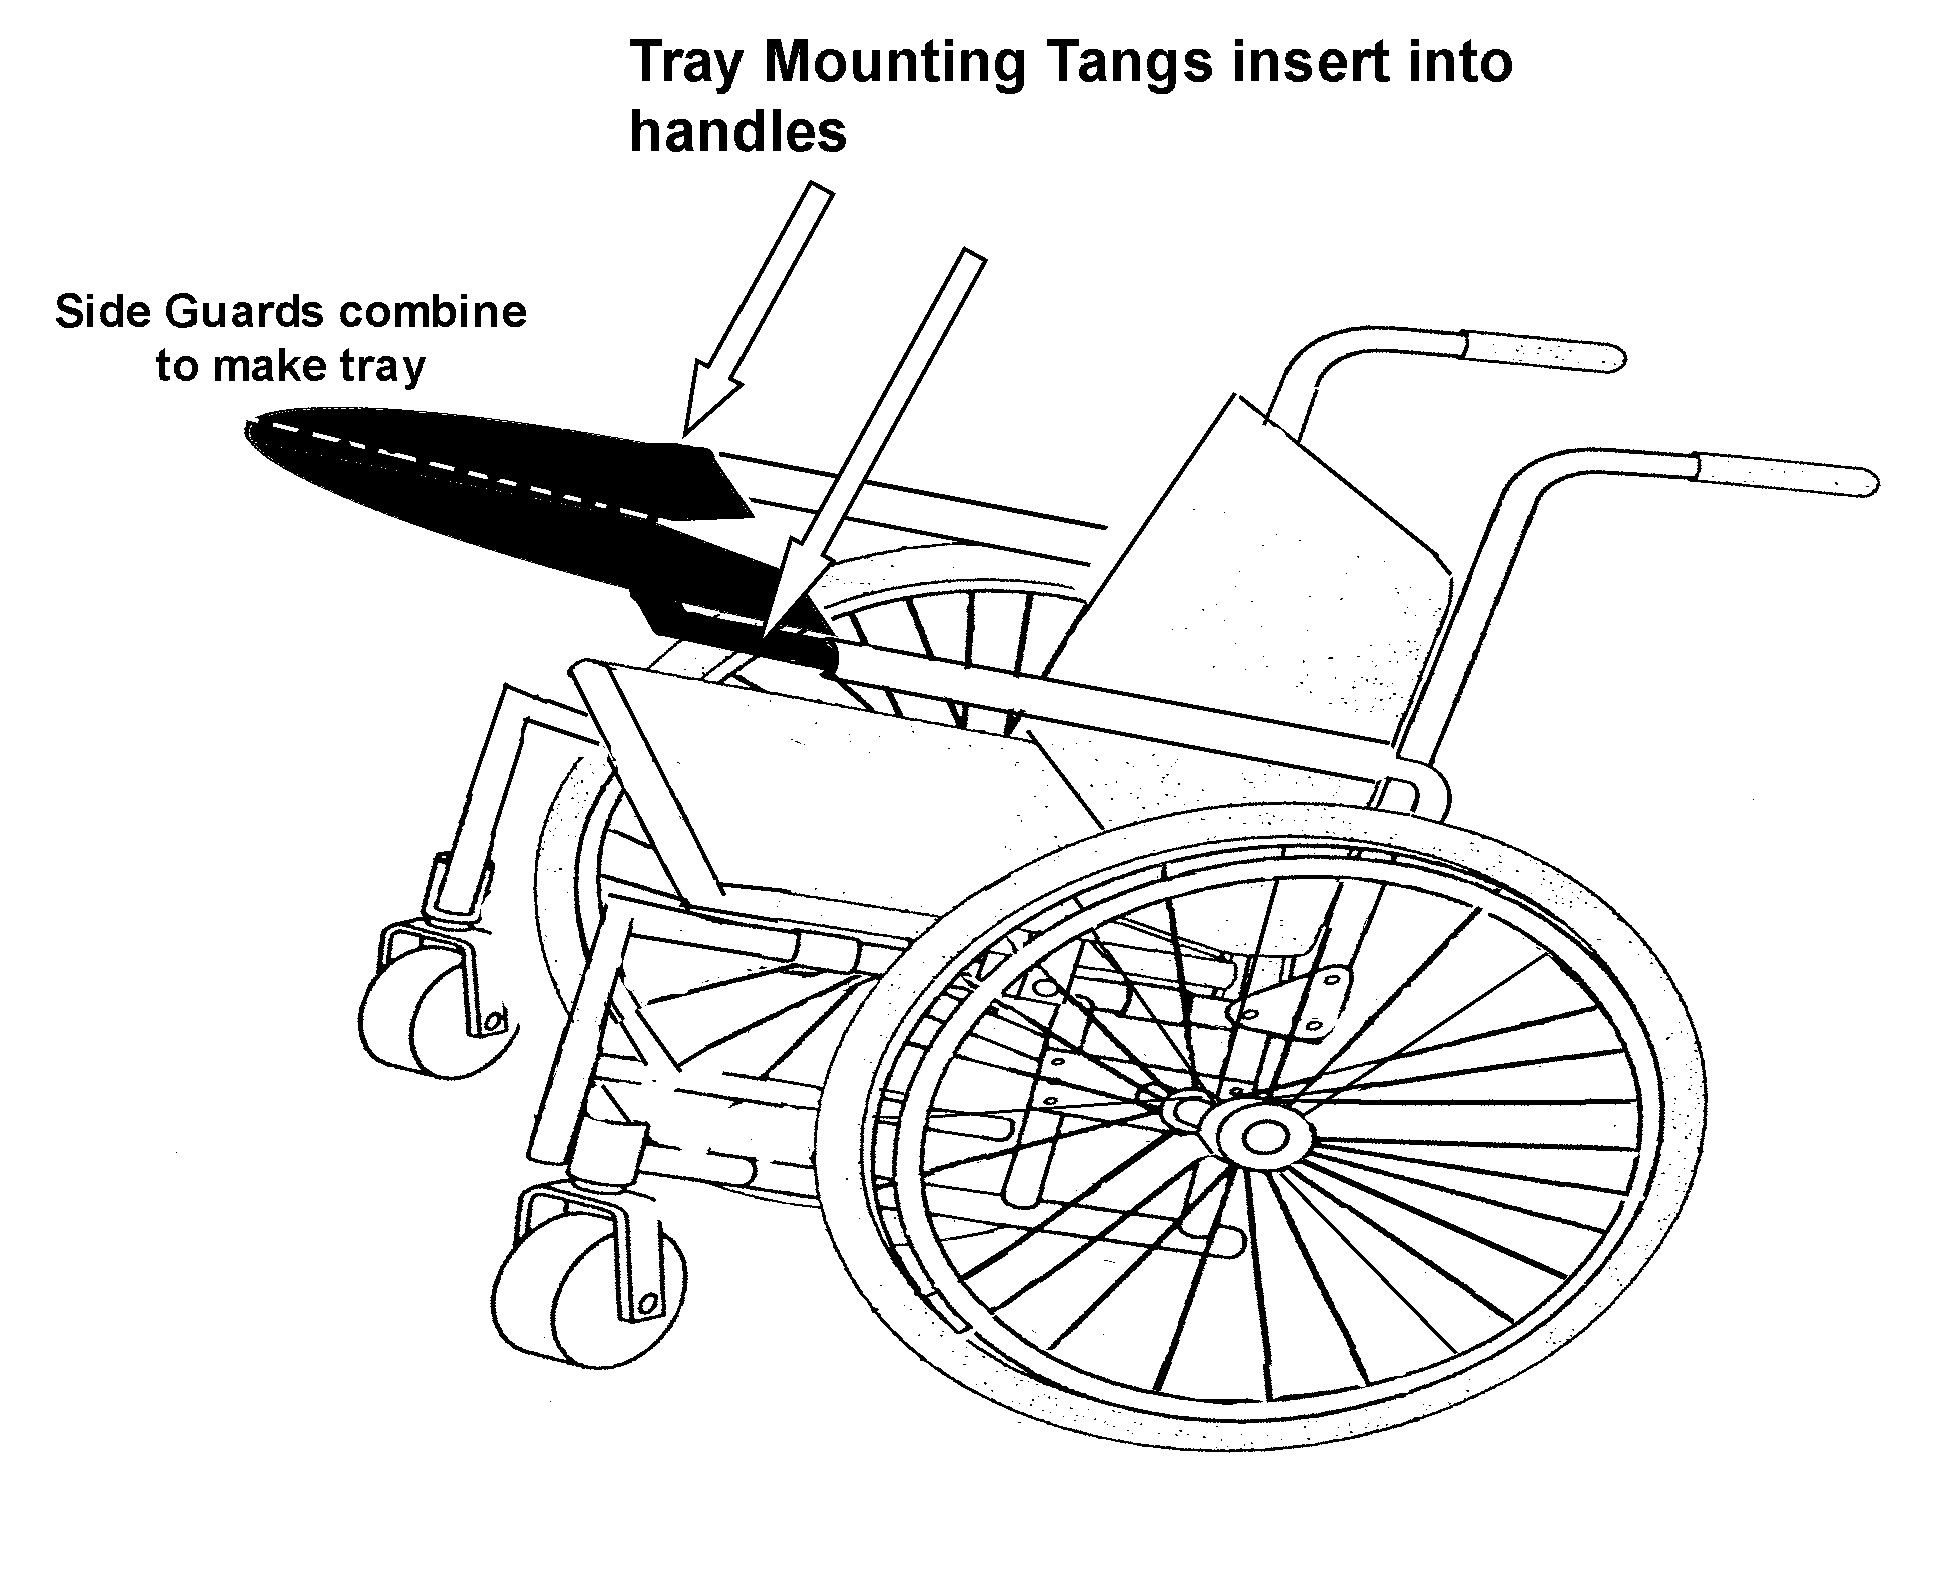 Using Wheelchair Side Guards to form a usable tray